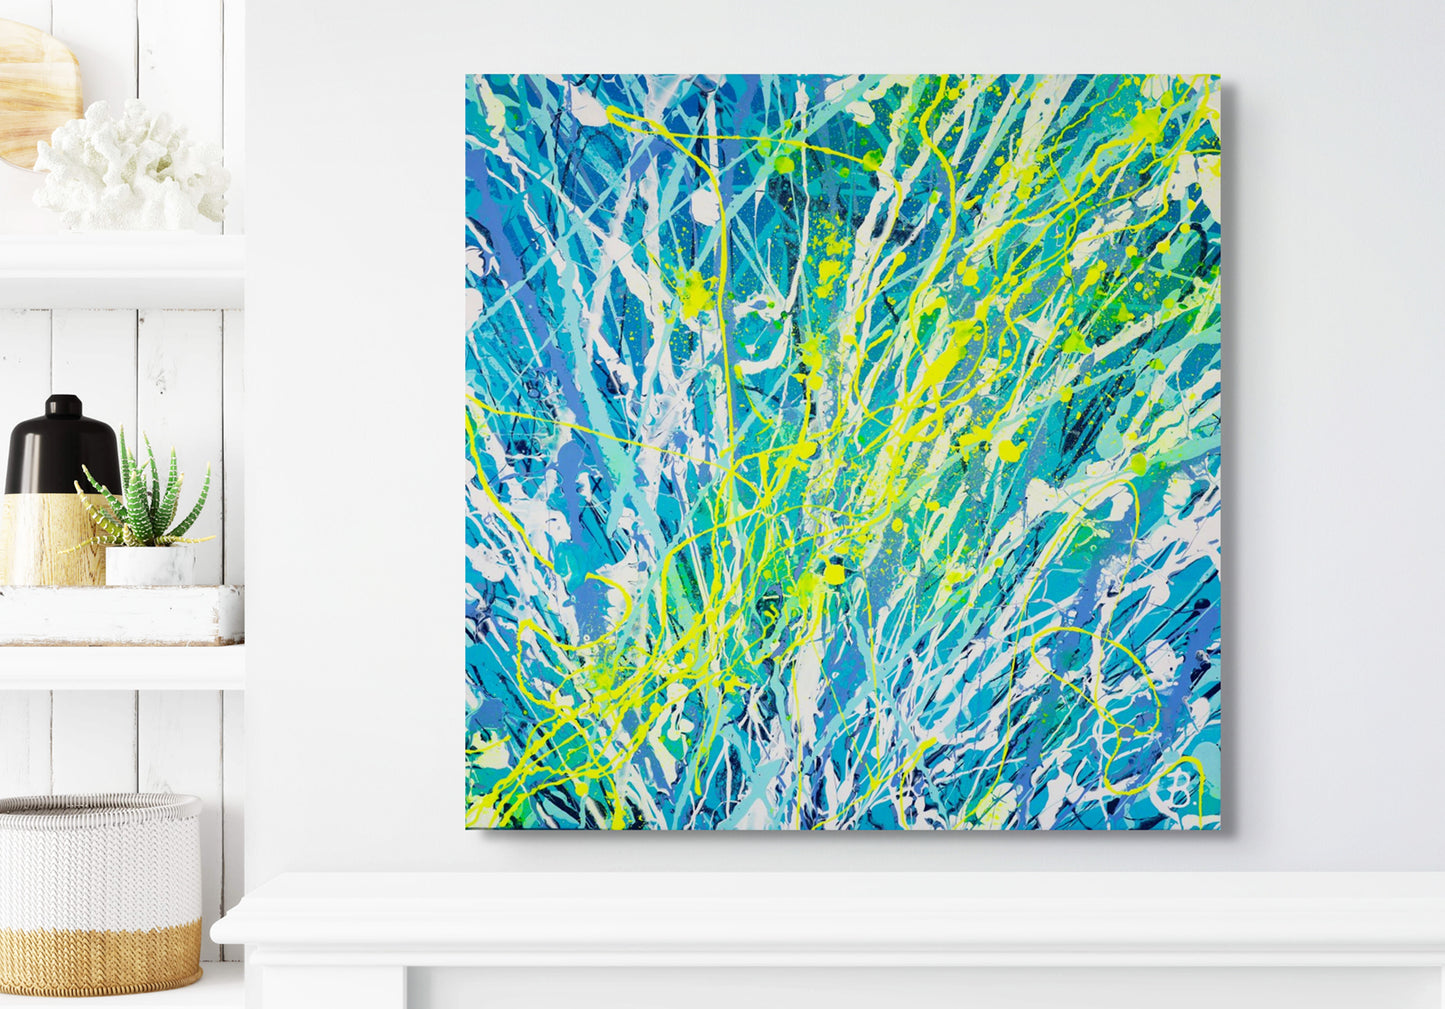 'Luminescence' Original Abstract expressionism Painting on Canvas inspired  by Ocean Life, seen Hanging In Living Room. Hand Painted by Abstract Expressionist Artist, Bridget Bradley